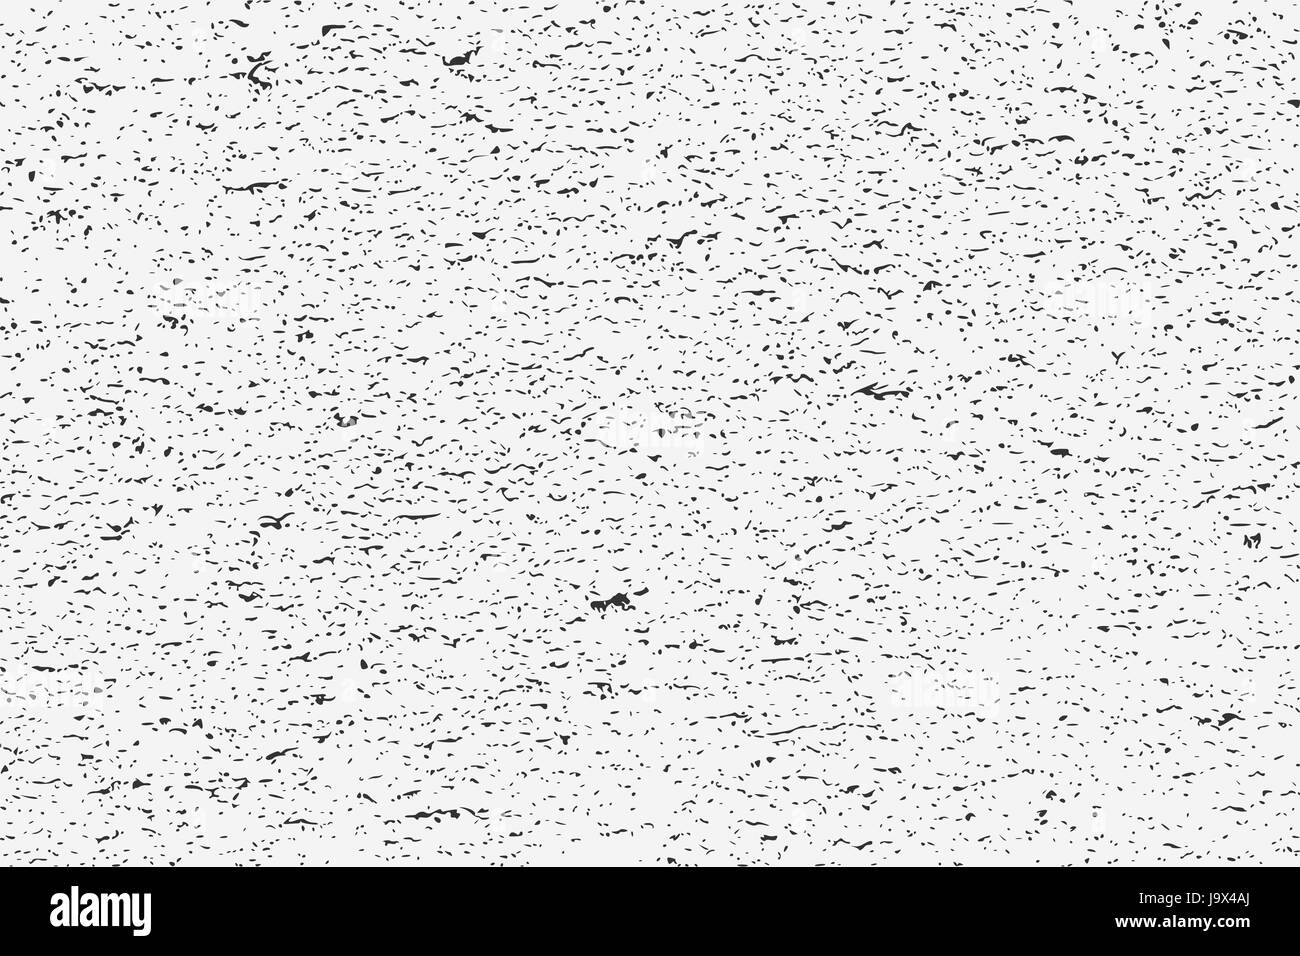 Grunge overlay stonewall texture. Vector illustration of black and white abstract grunge background for your design Stock Vector